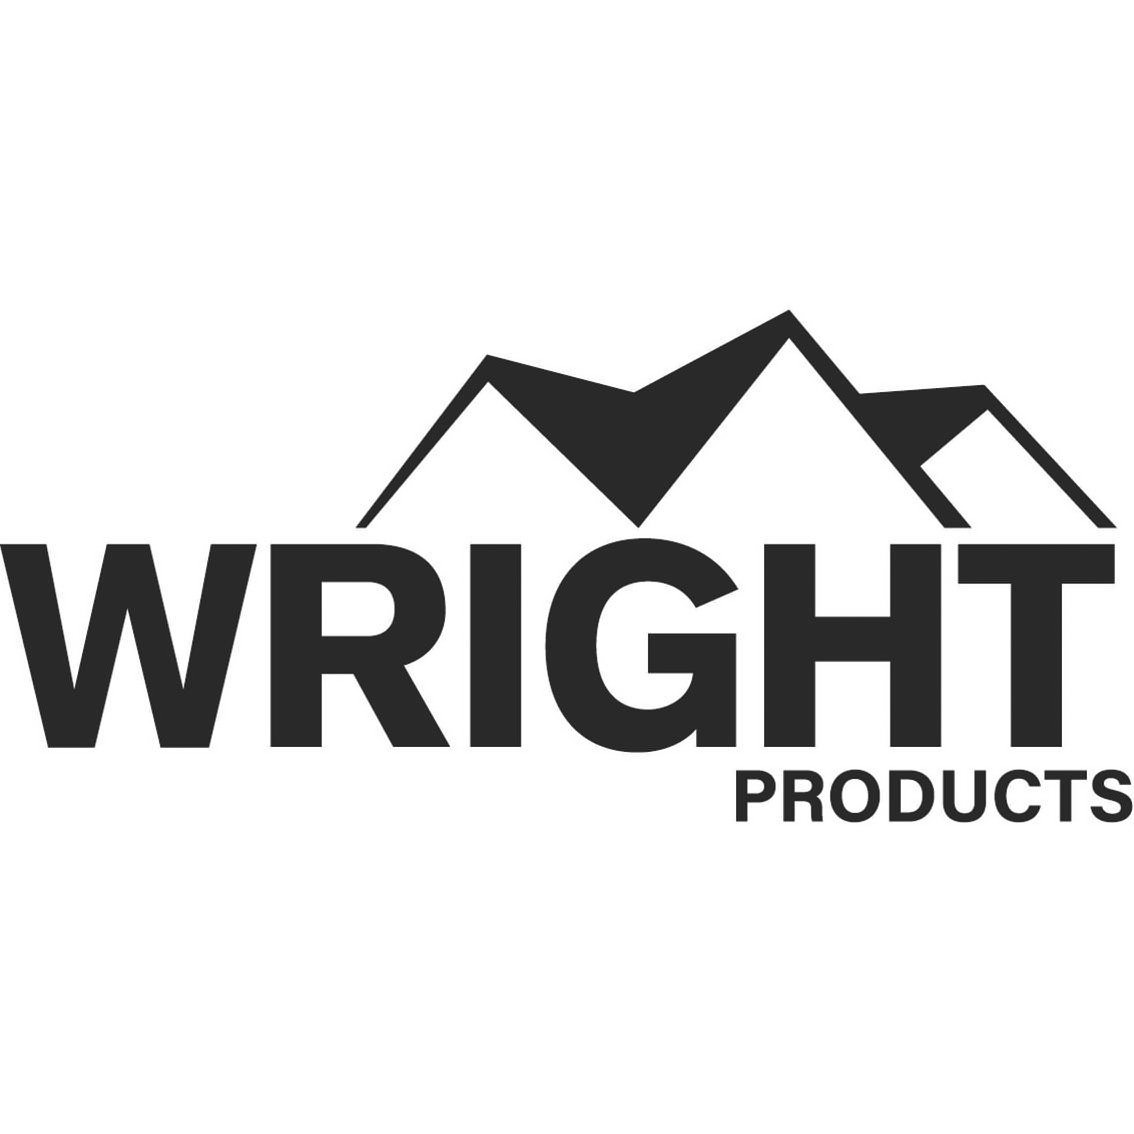  WRIGHT PRODUCTS